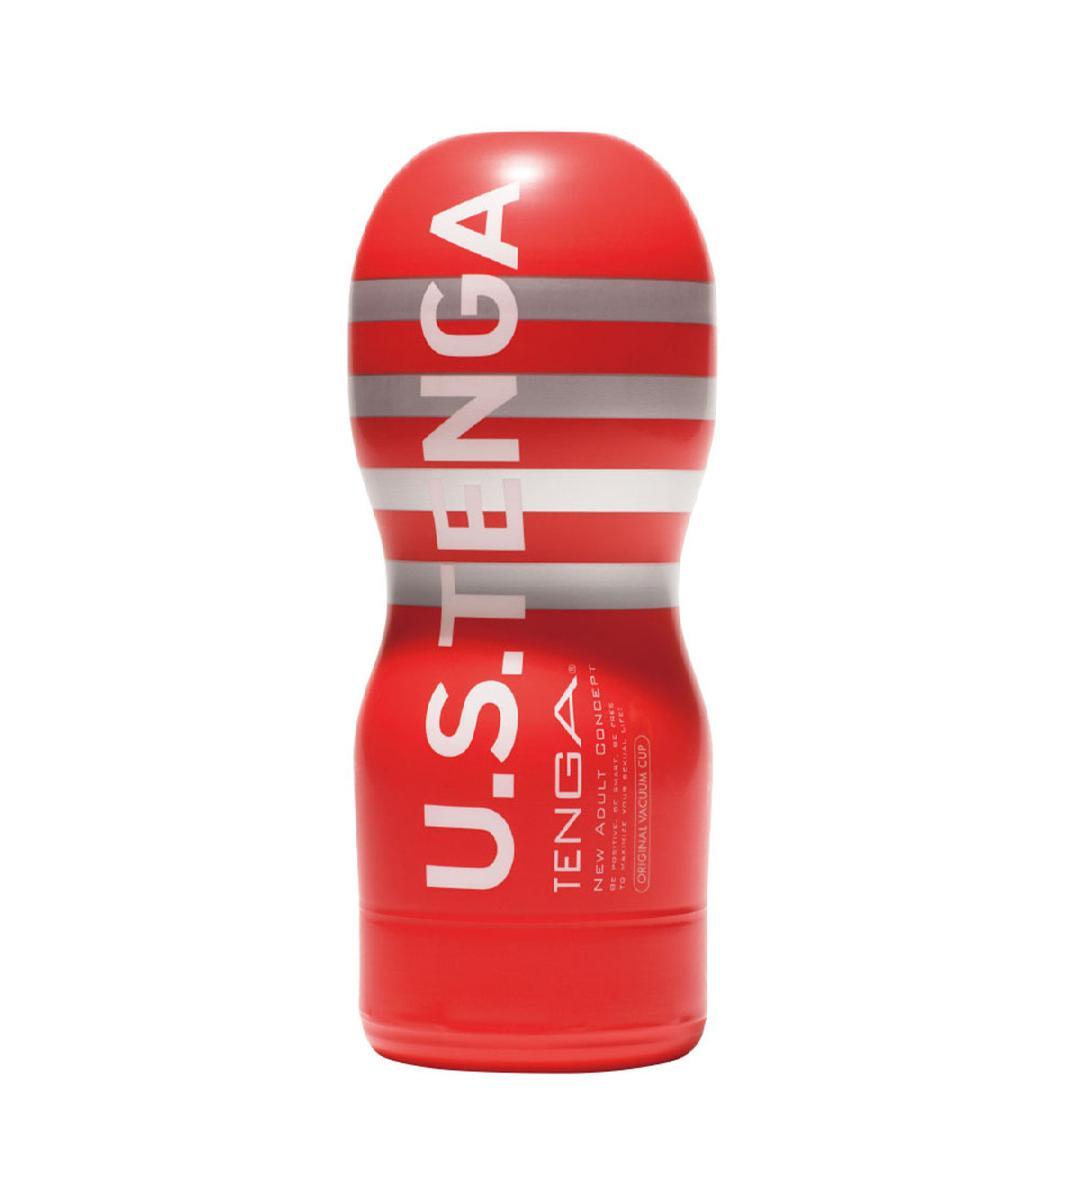 Tenga Ultra US Original Cup - Buy At Luxury Toy X - Free 3-Day Shipping